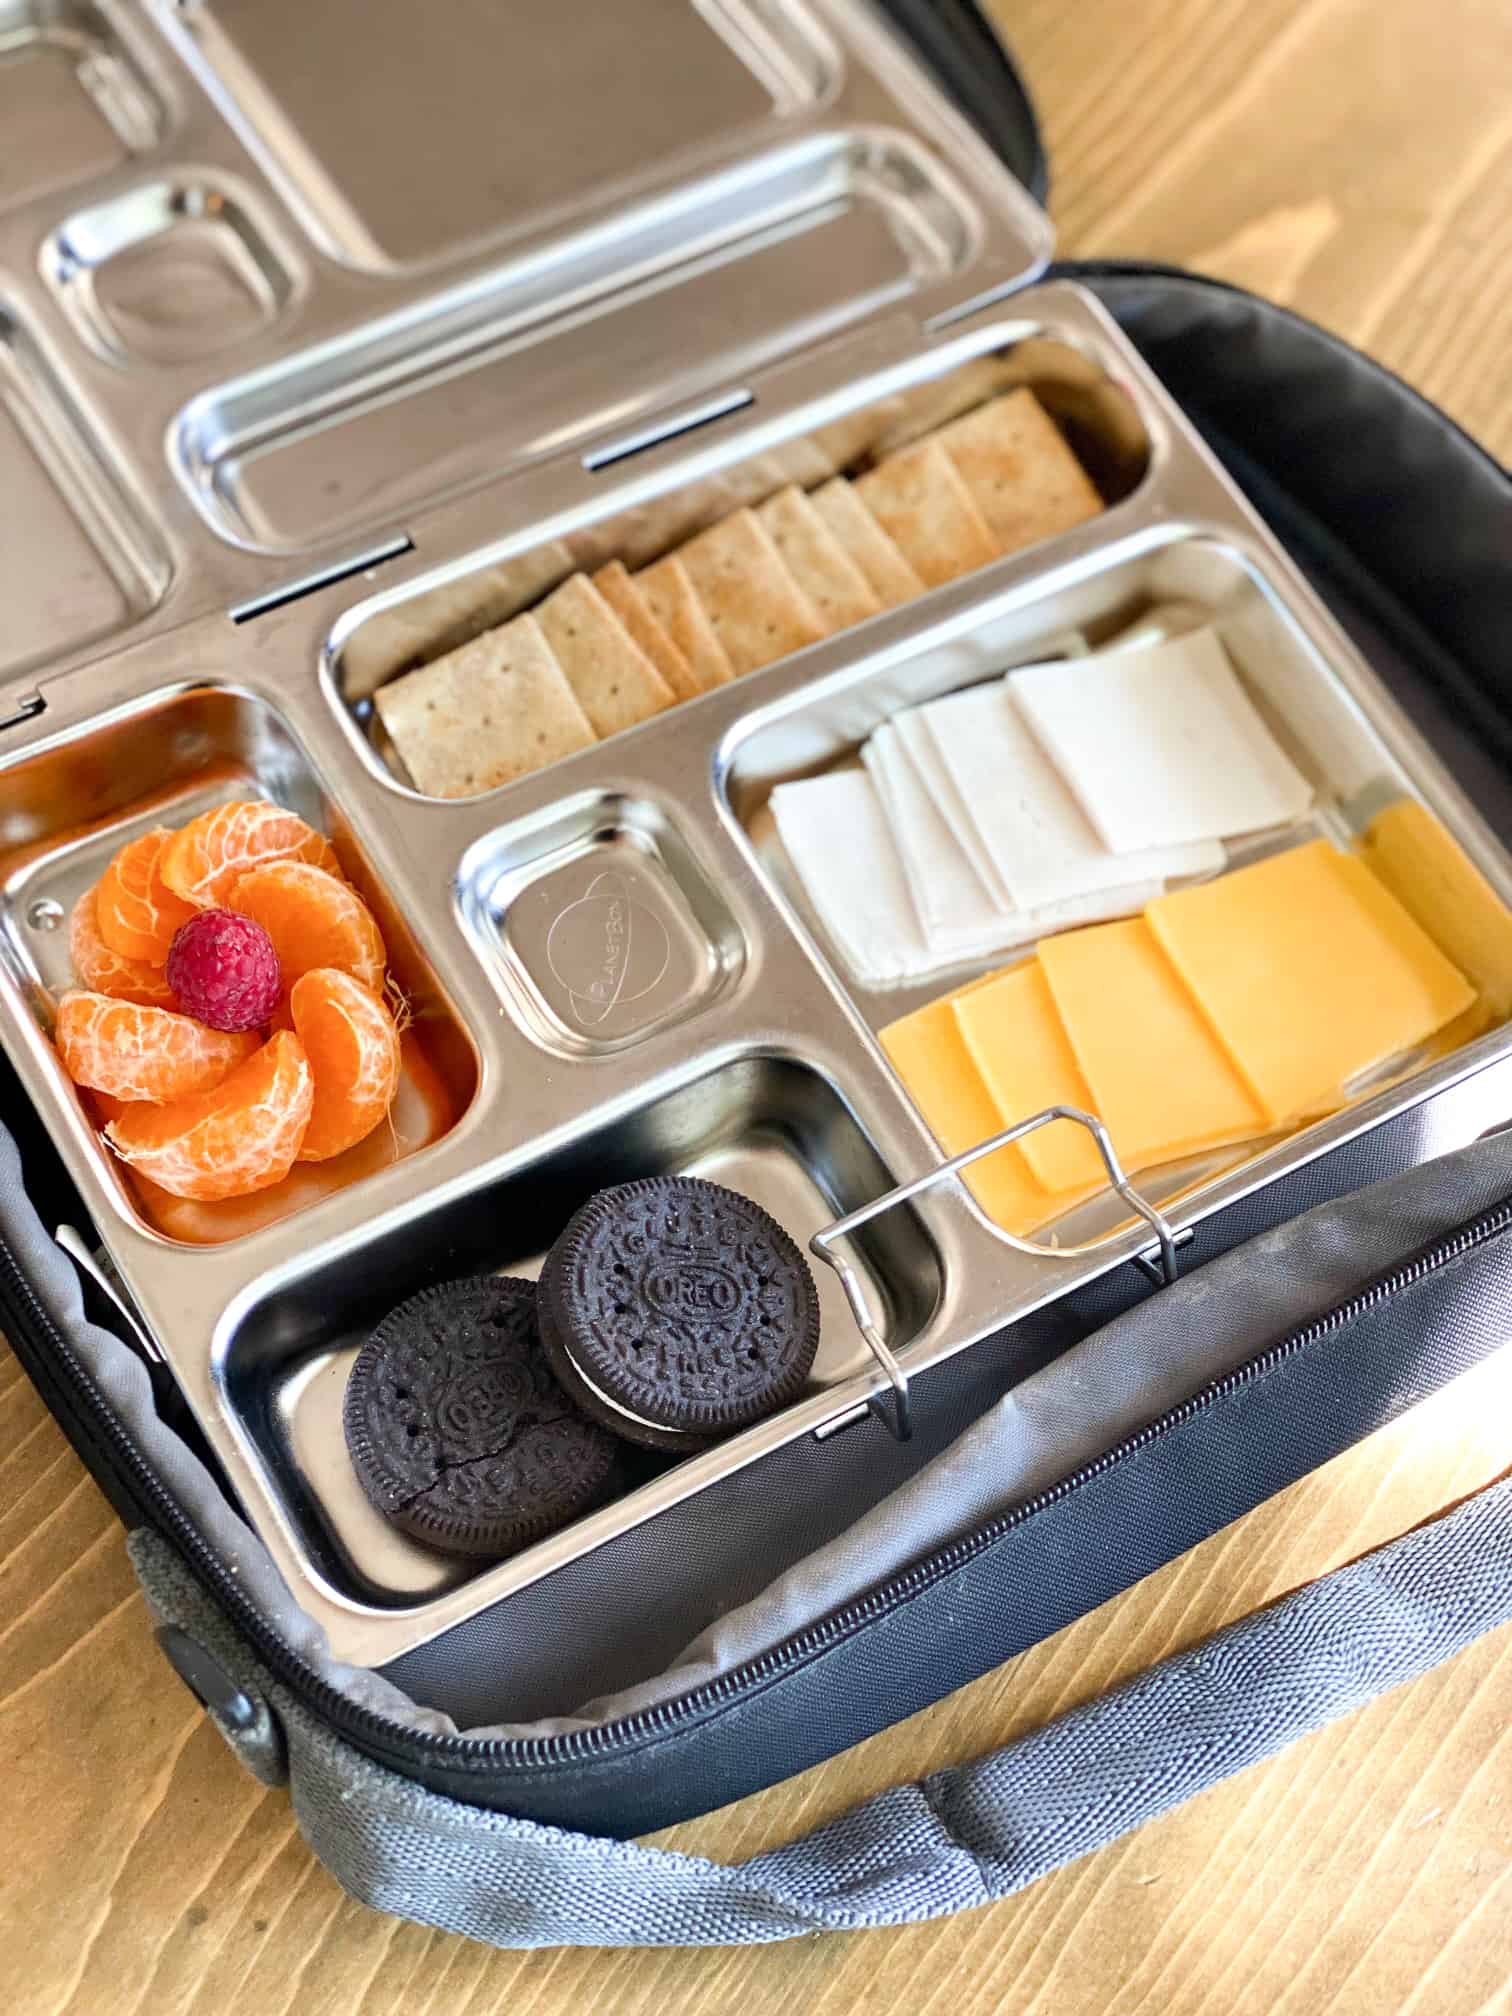 Easy Homemade Healthy Lunchables - One Sweet Appetite